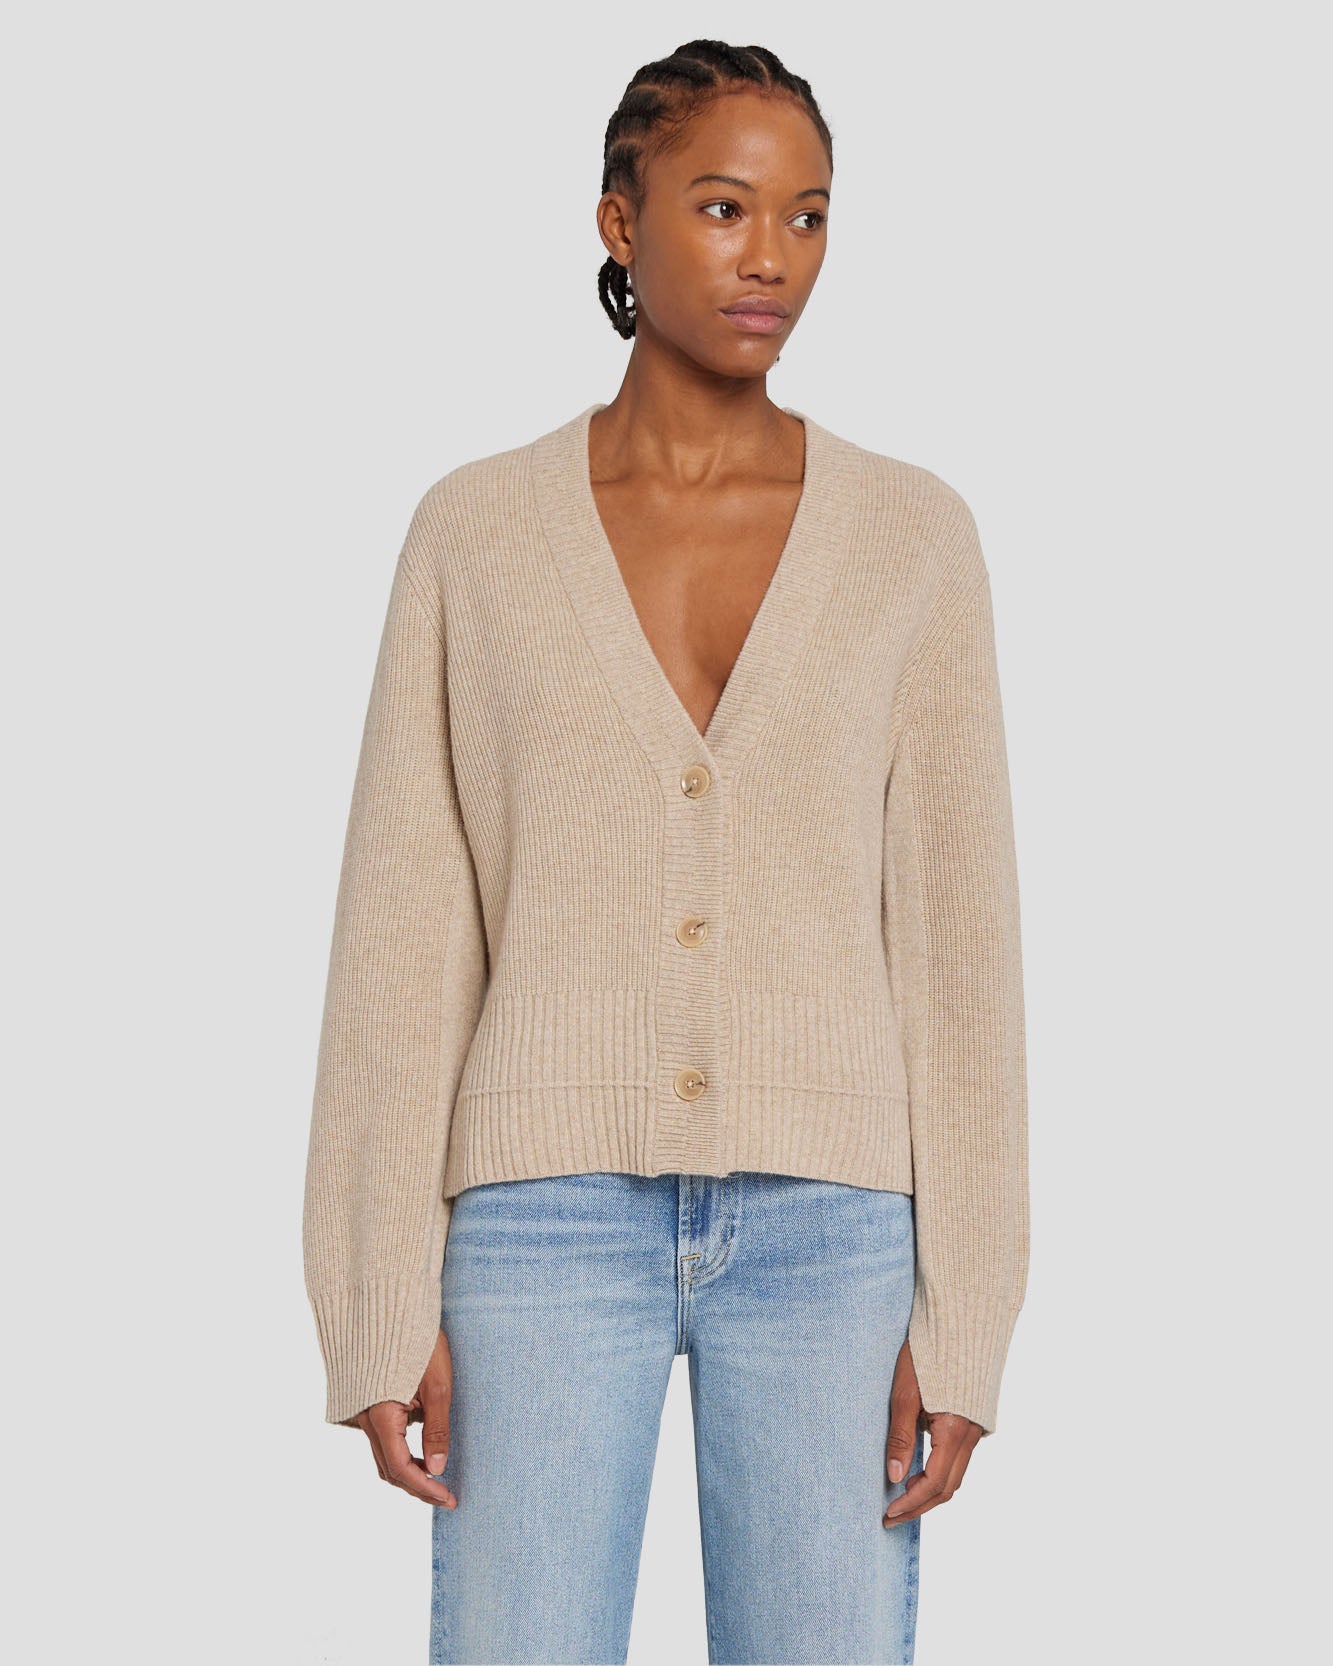 7 For All Mankind Cashmere Cardigan in Oatmeal 7N123F34OAT